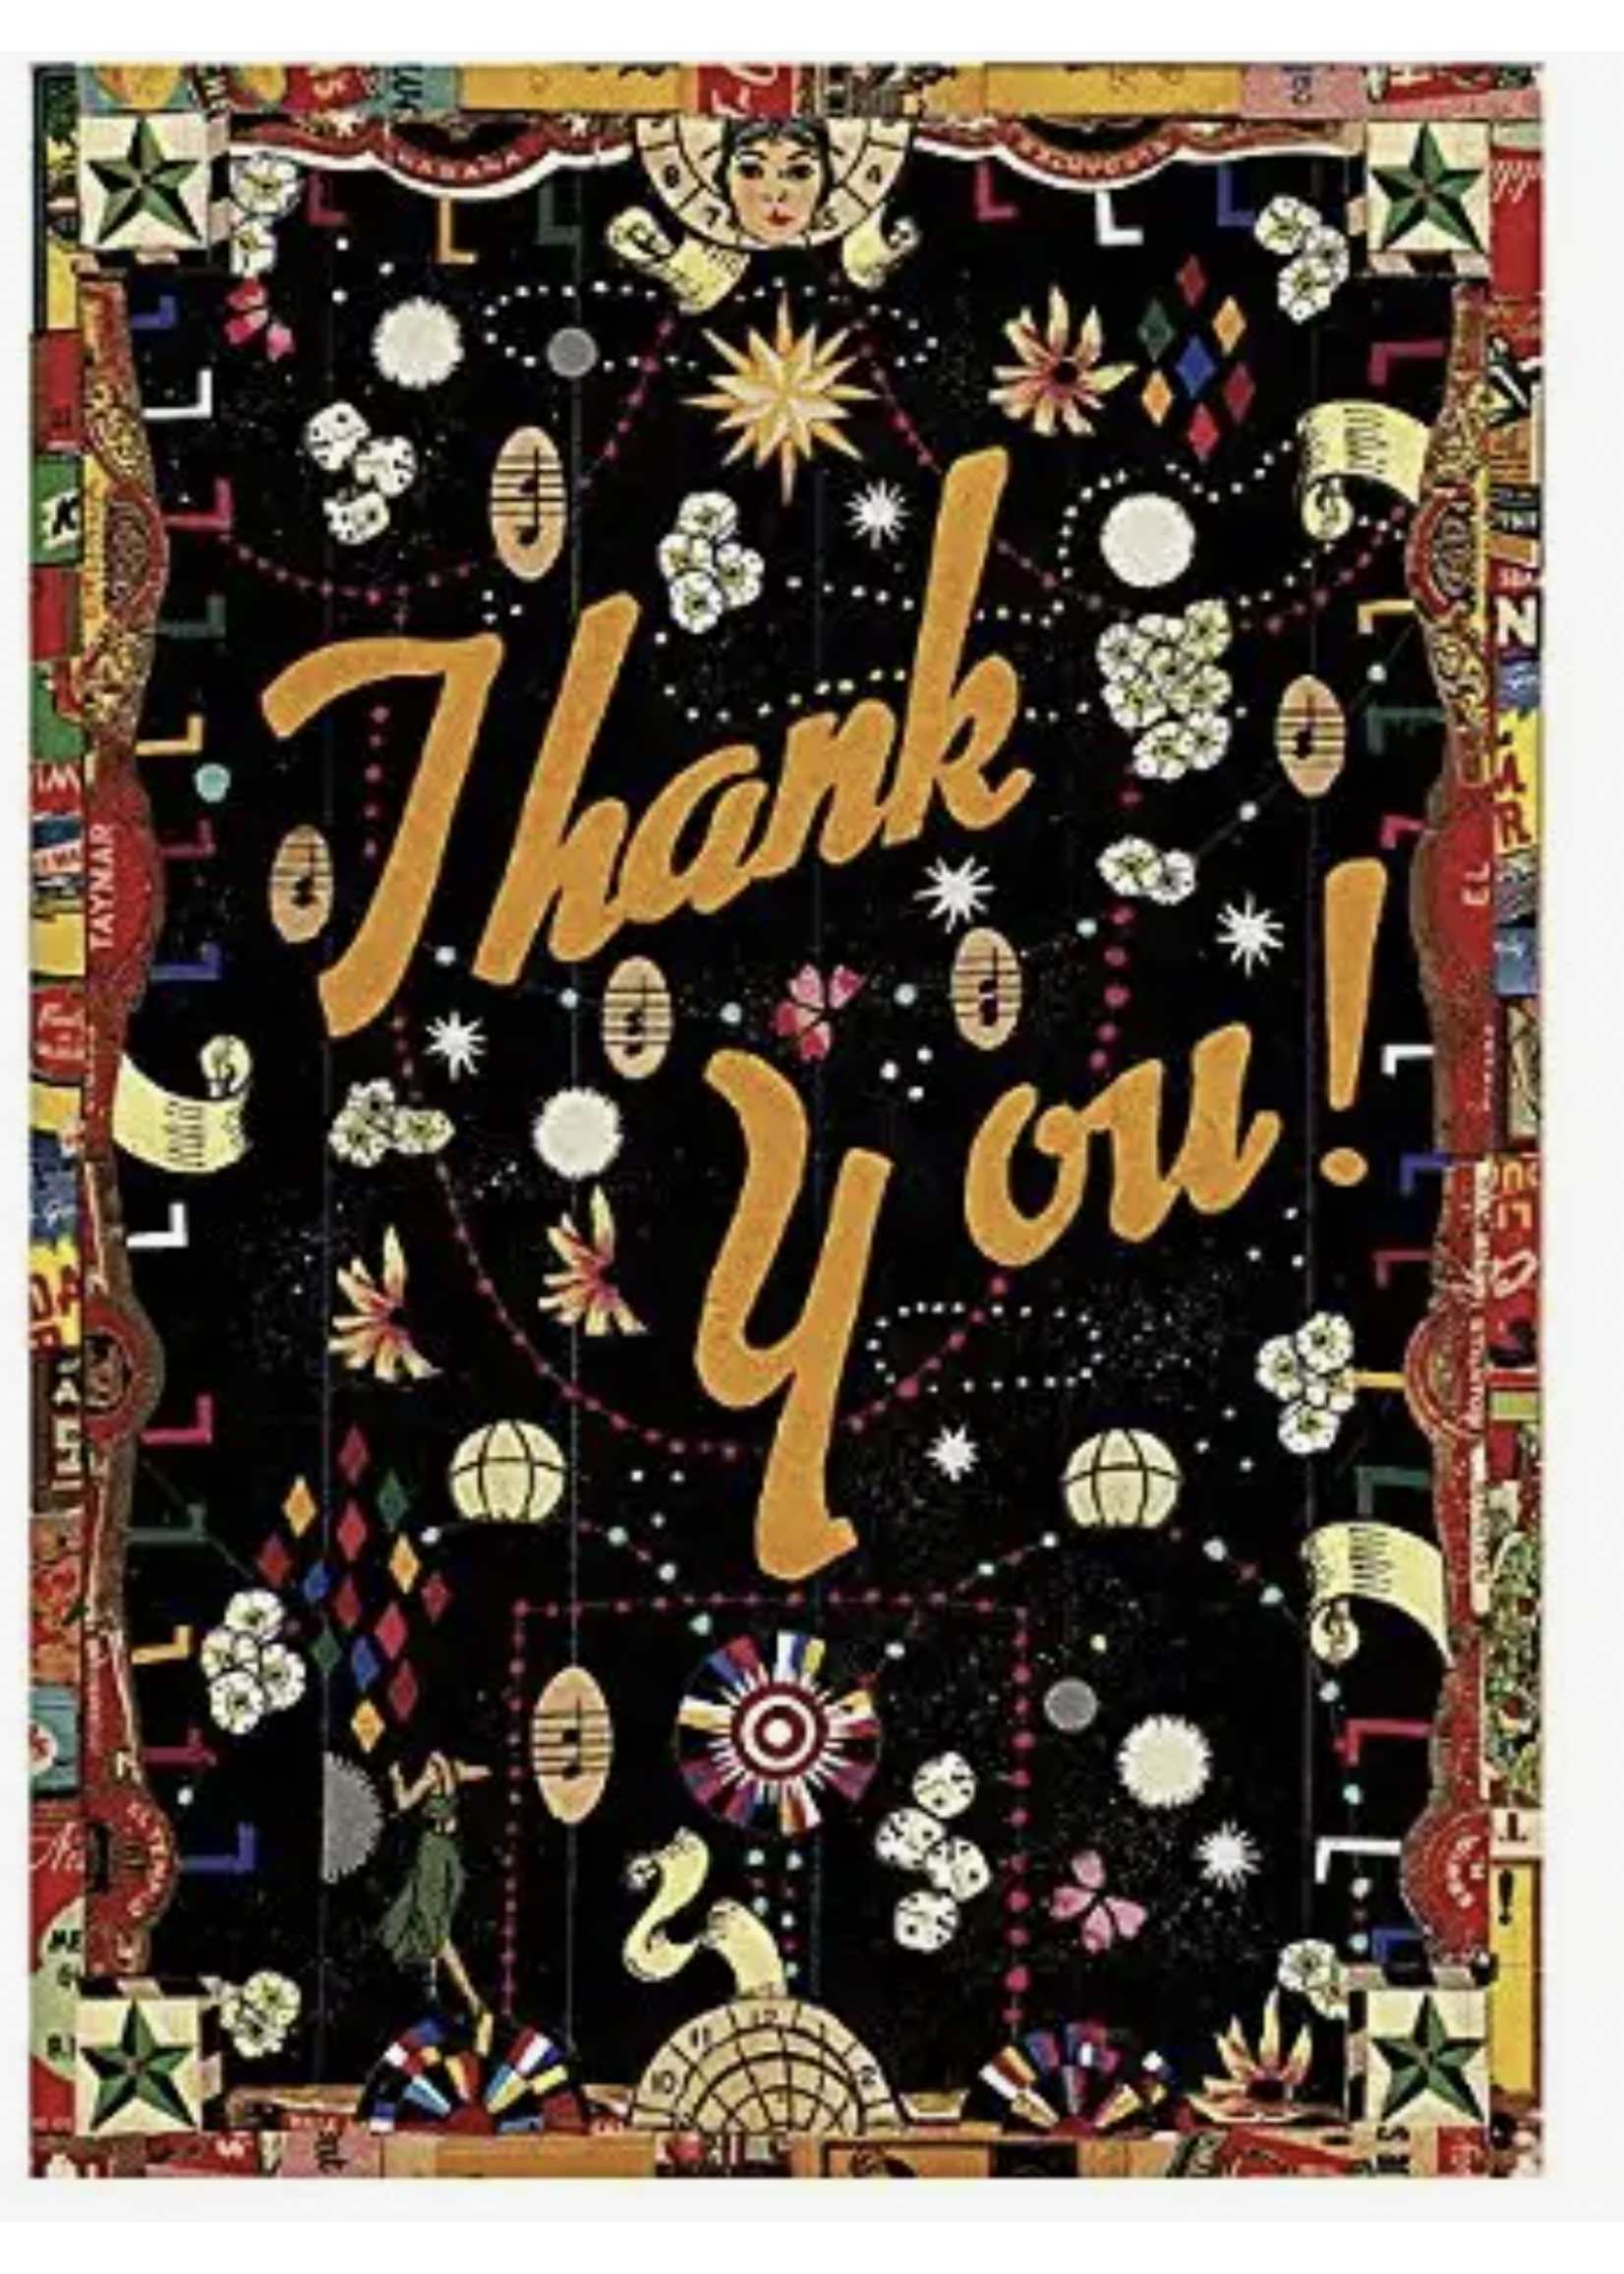 Texas Bookman Tony Fitzpatrick - Thank You!  Boxed Note Cards